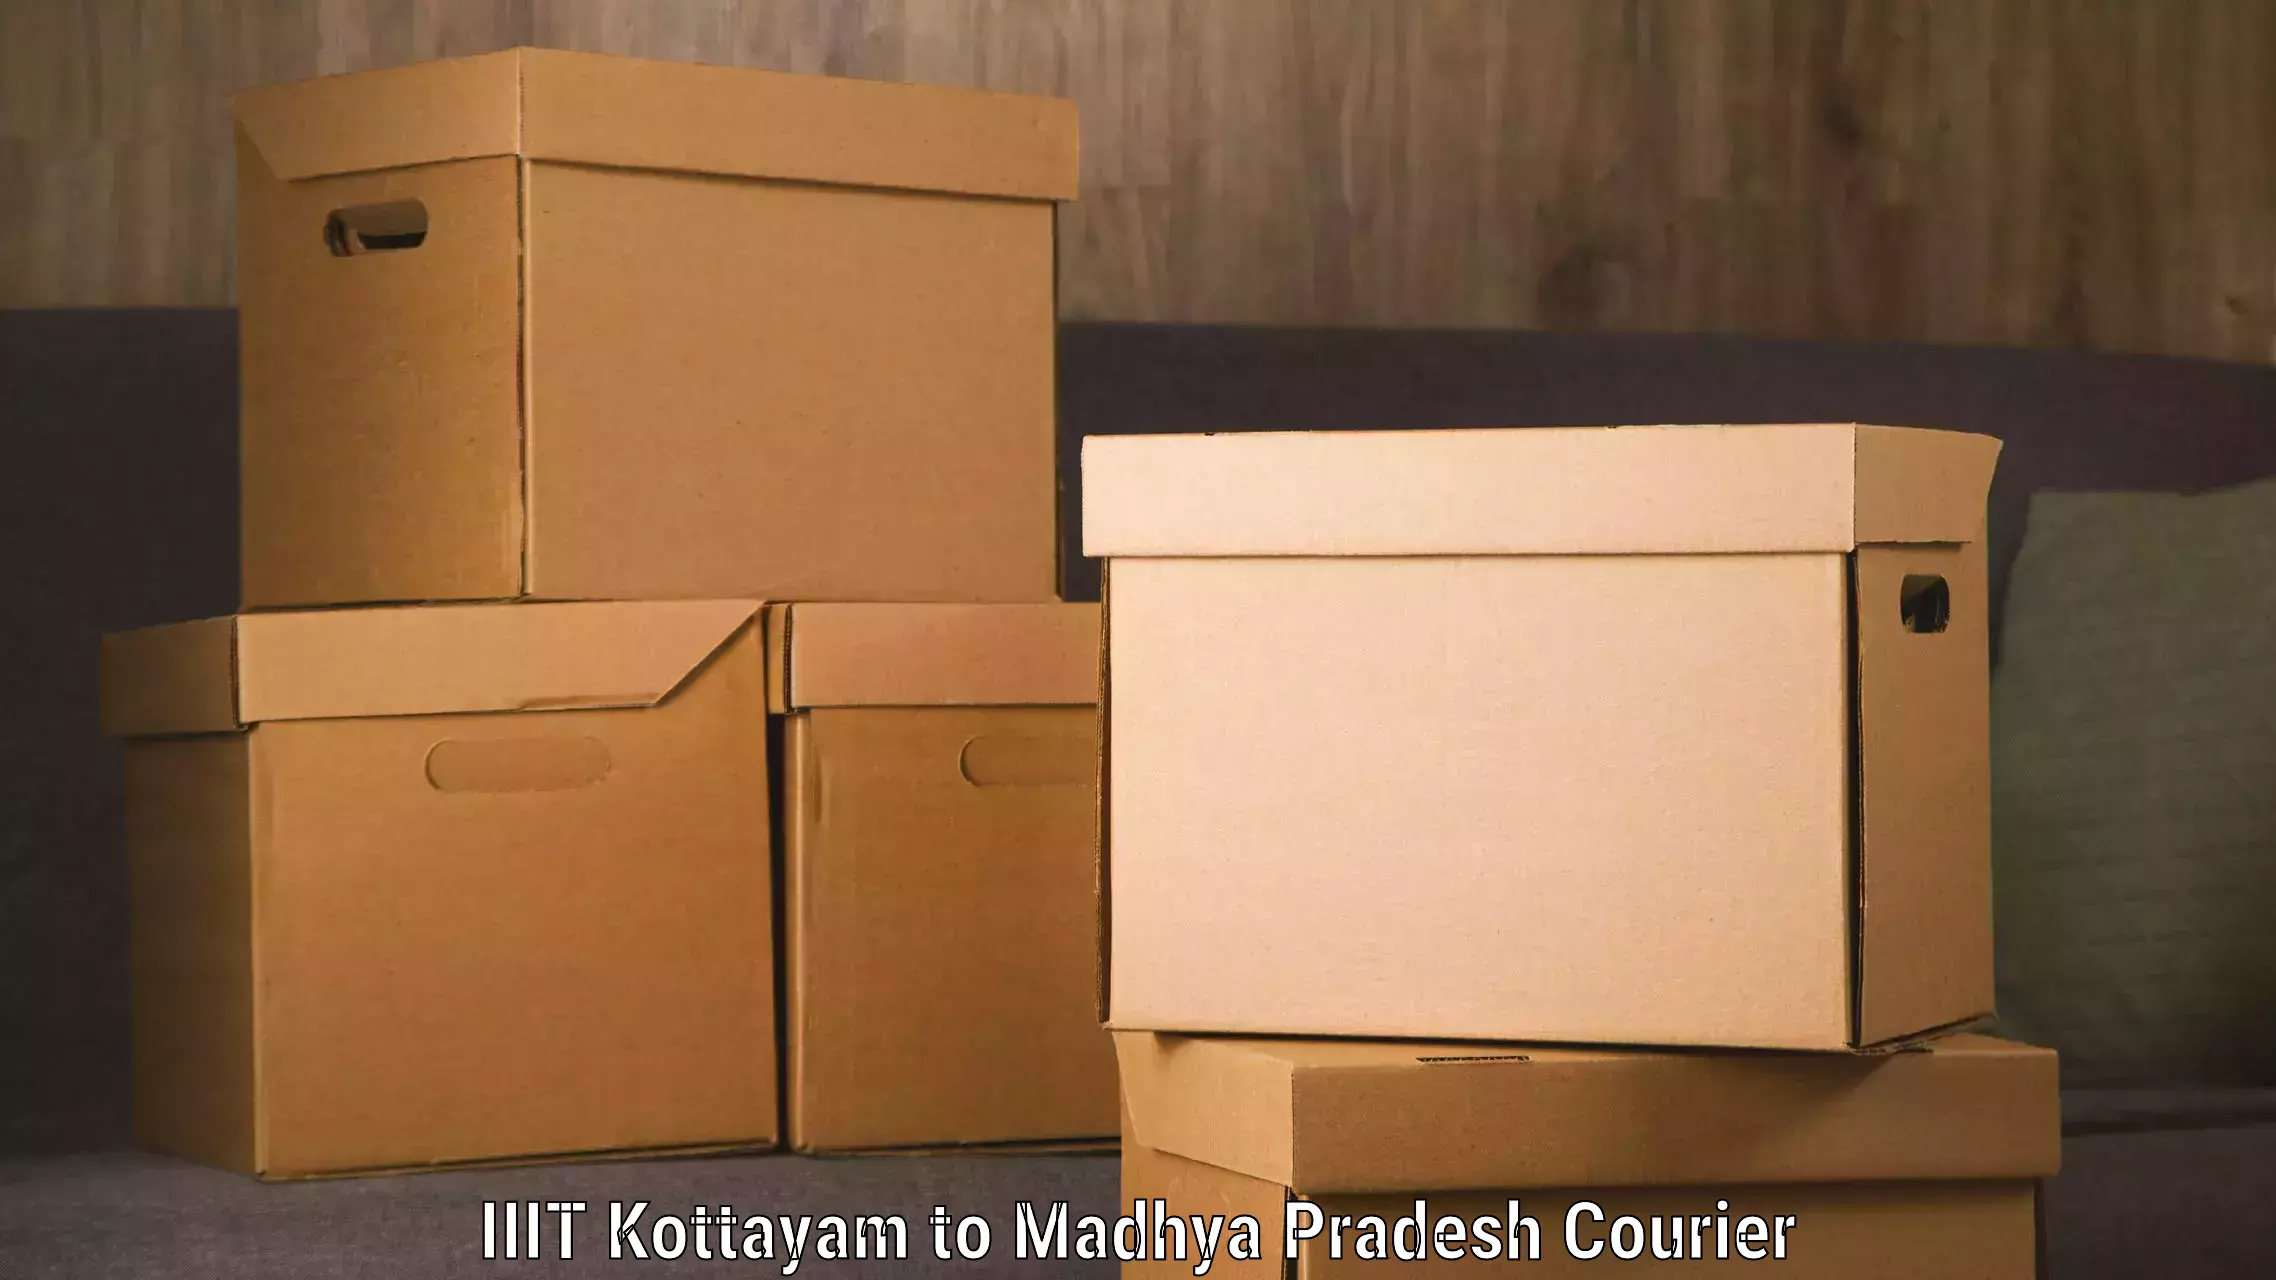 Same-day delivery solutions IIIT Kottayam to Chitrangi